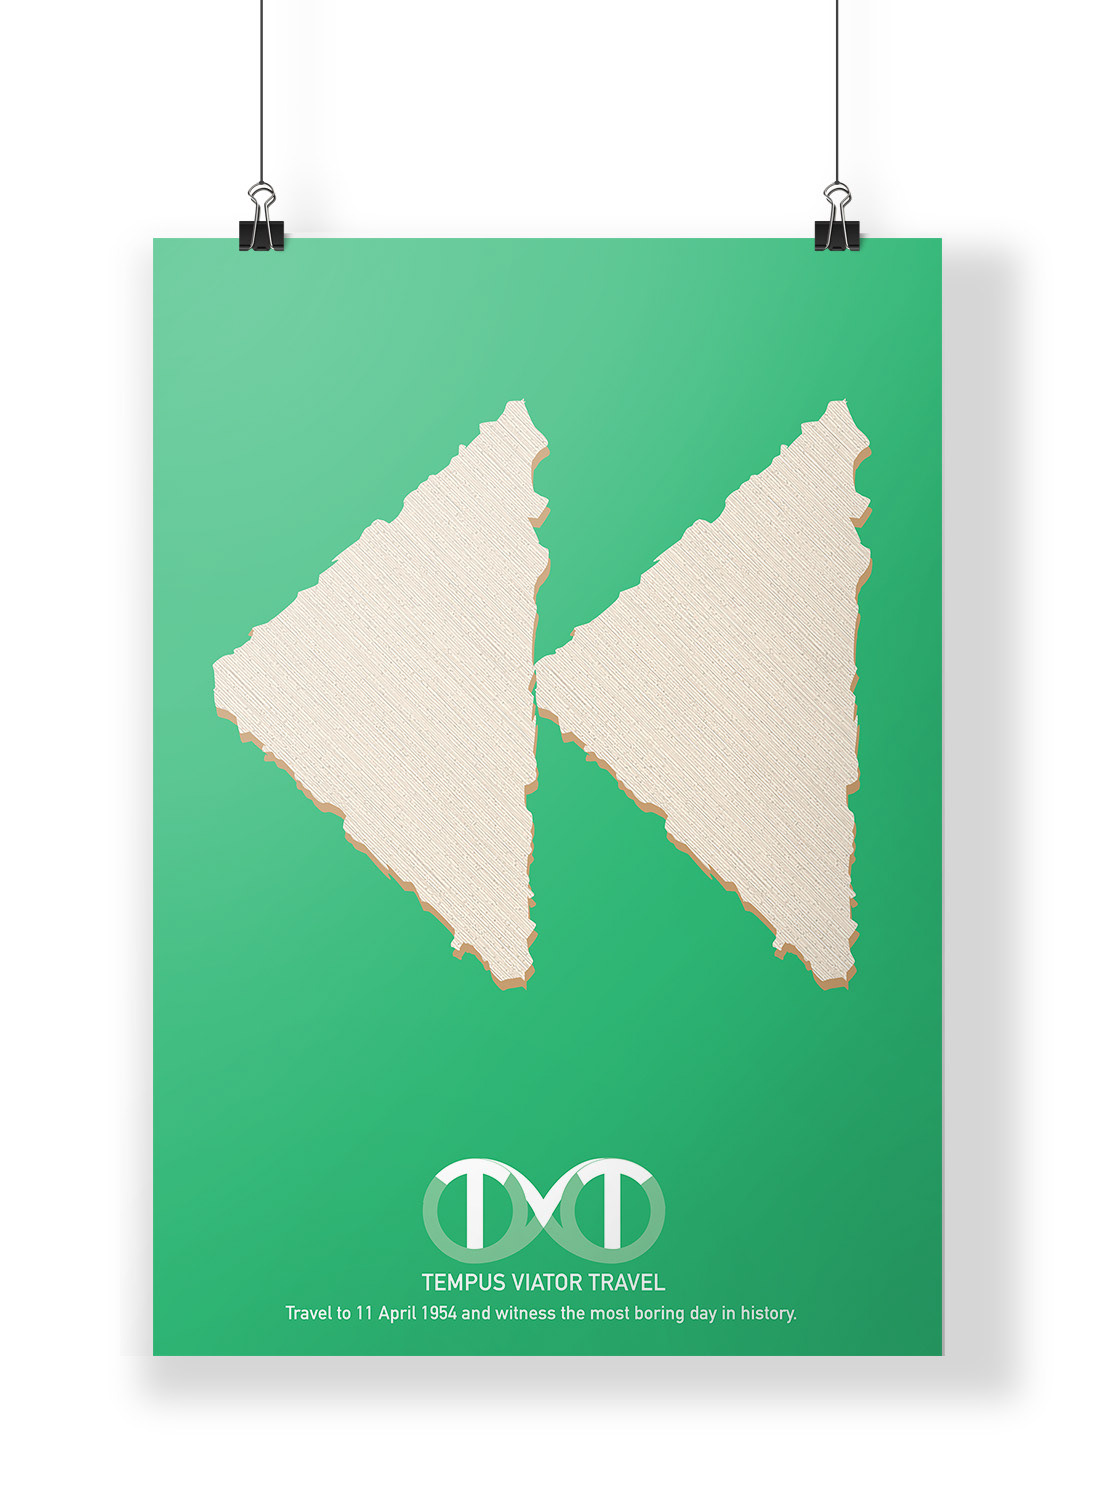 poster time travel Holiday sliced bread pyramids Screenprinting